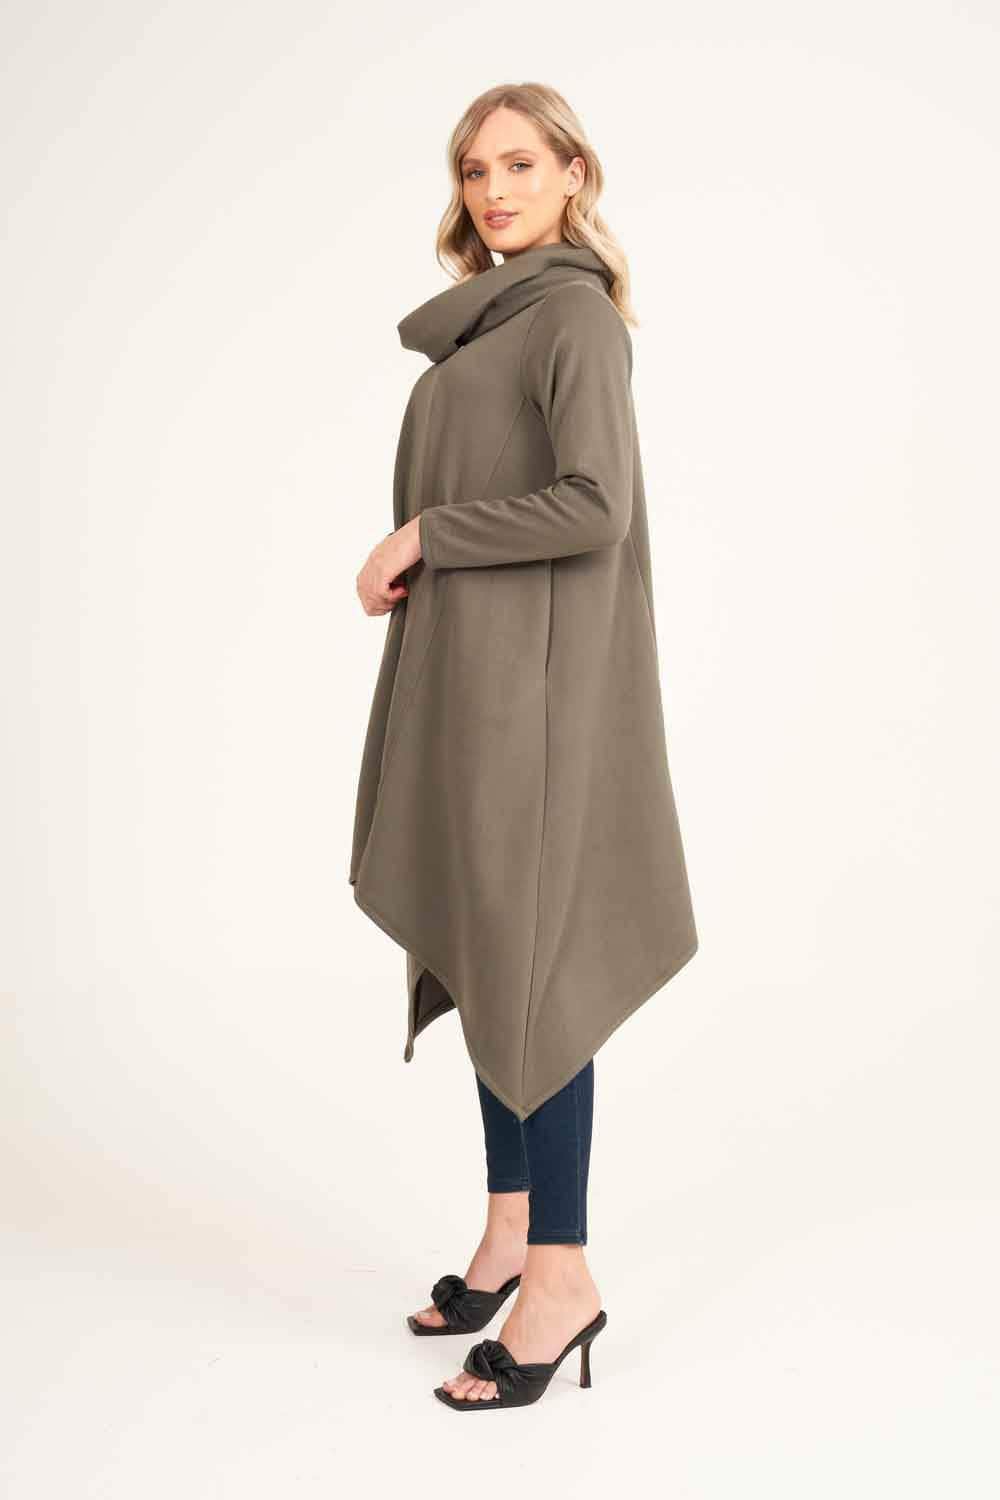 Saloos Longline Cowl-Neck Poncho Dress with Sleeves